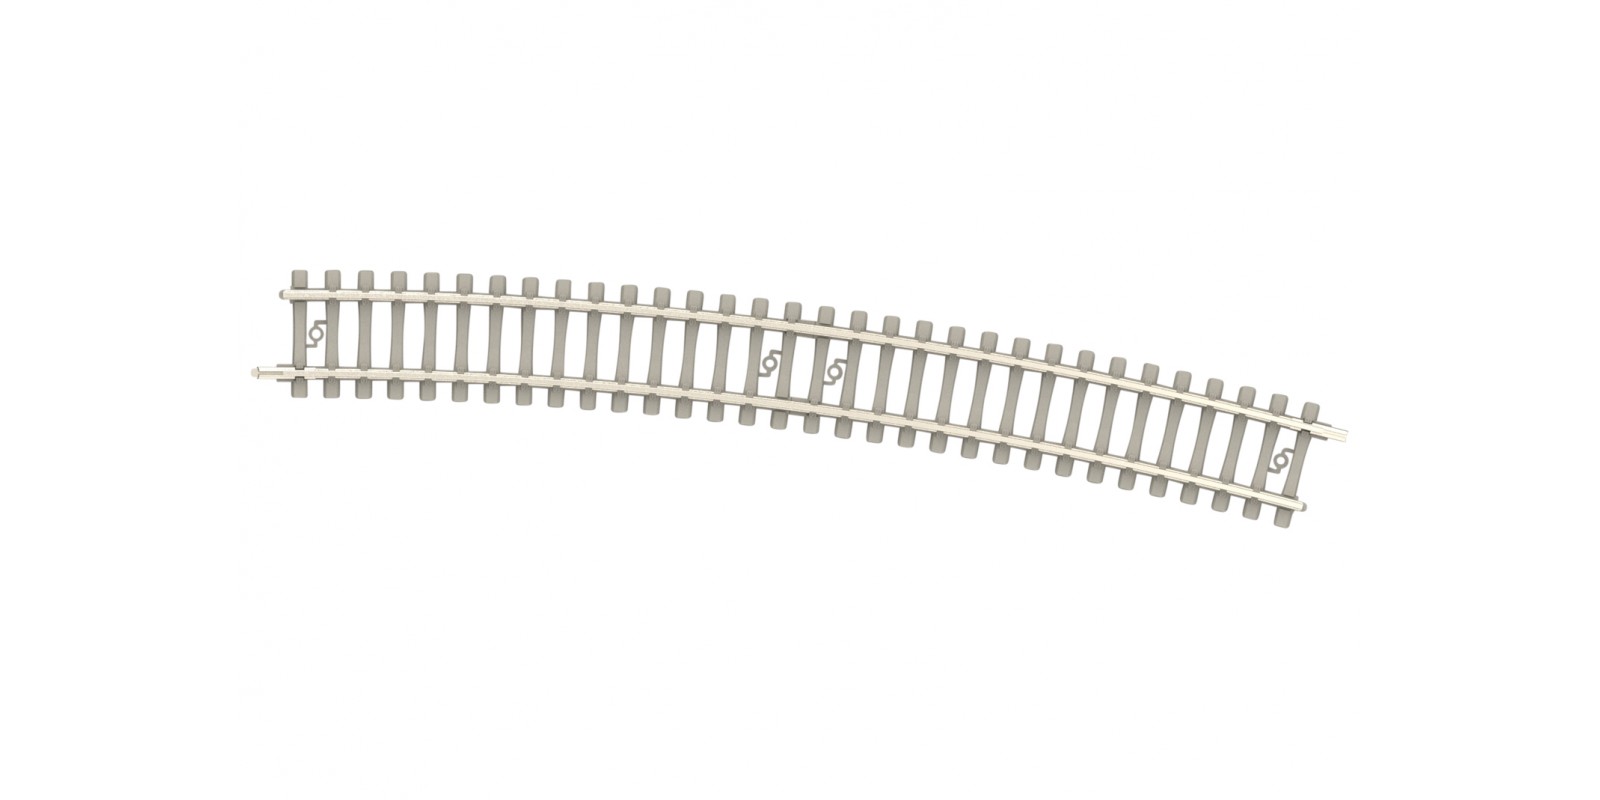 T14518 Curved Track with Concrete Ties